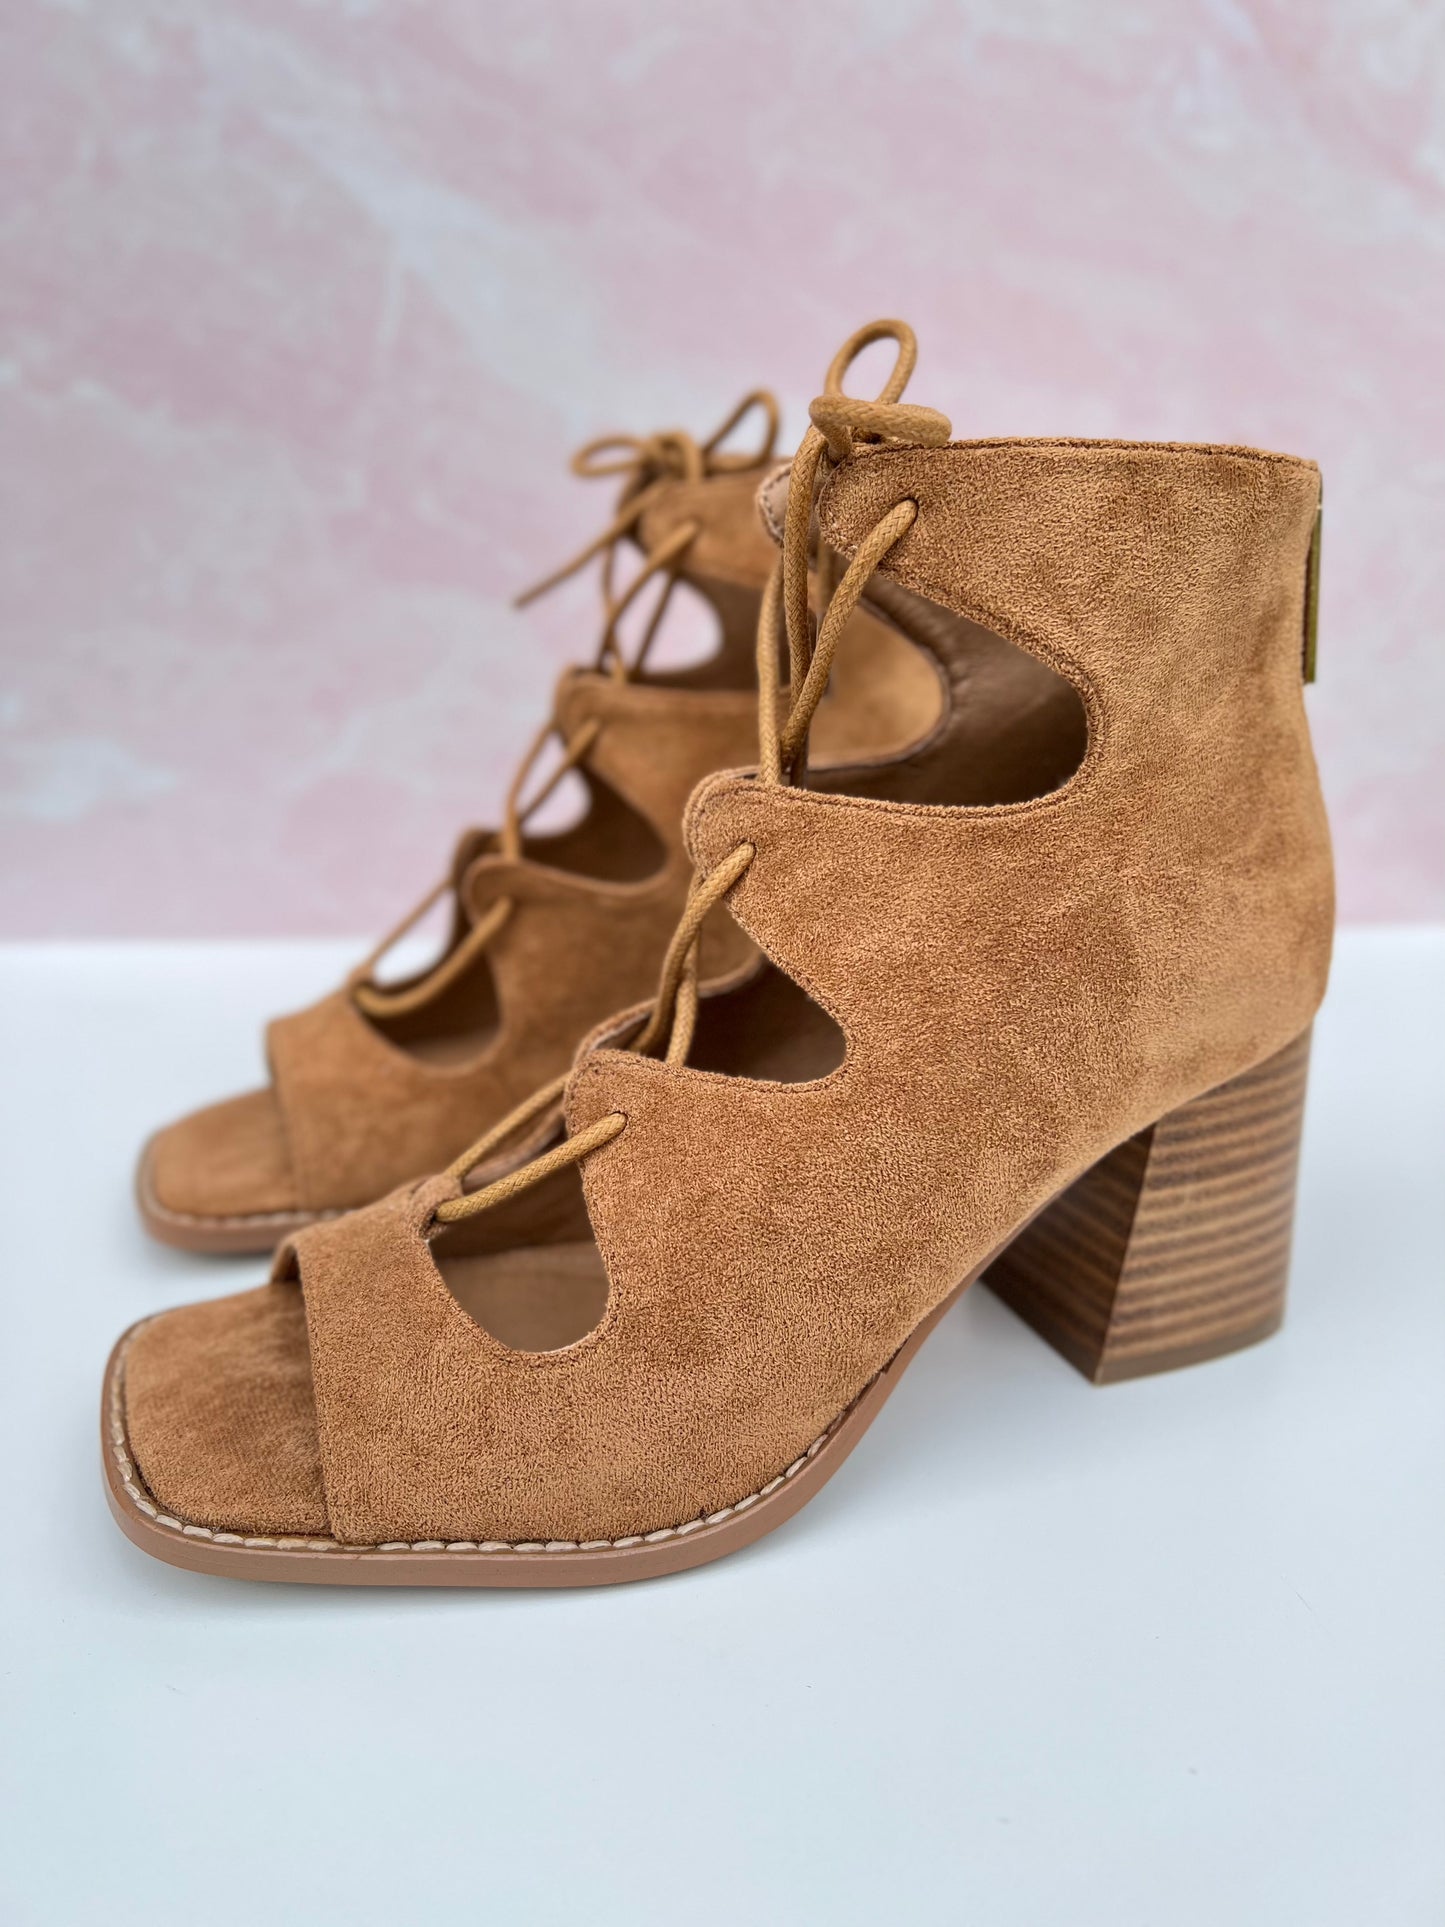 Corky's Wally Wedge - Camel Suede